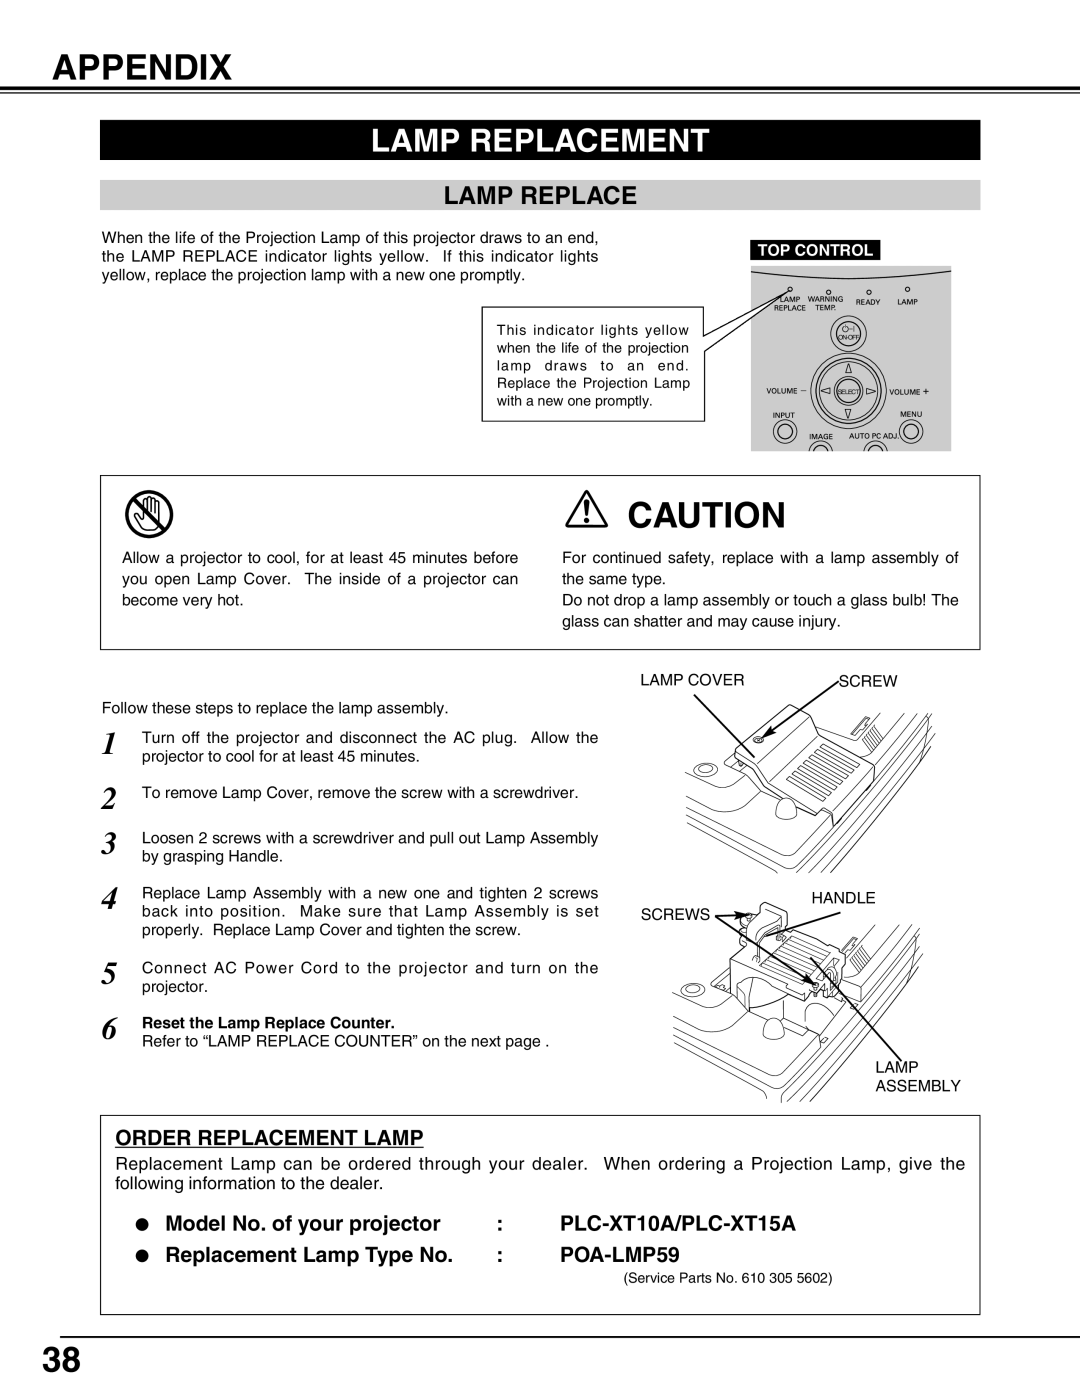 Sanyo PLC-XT10A owner manual Appendix, Lamp Replacement, Reset the Lamp Replace Counter 